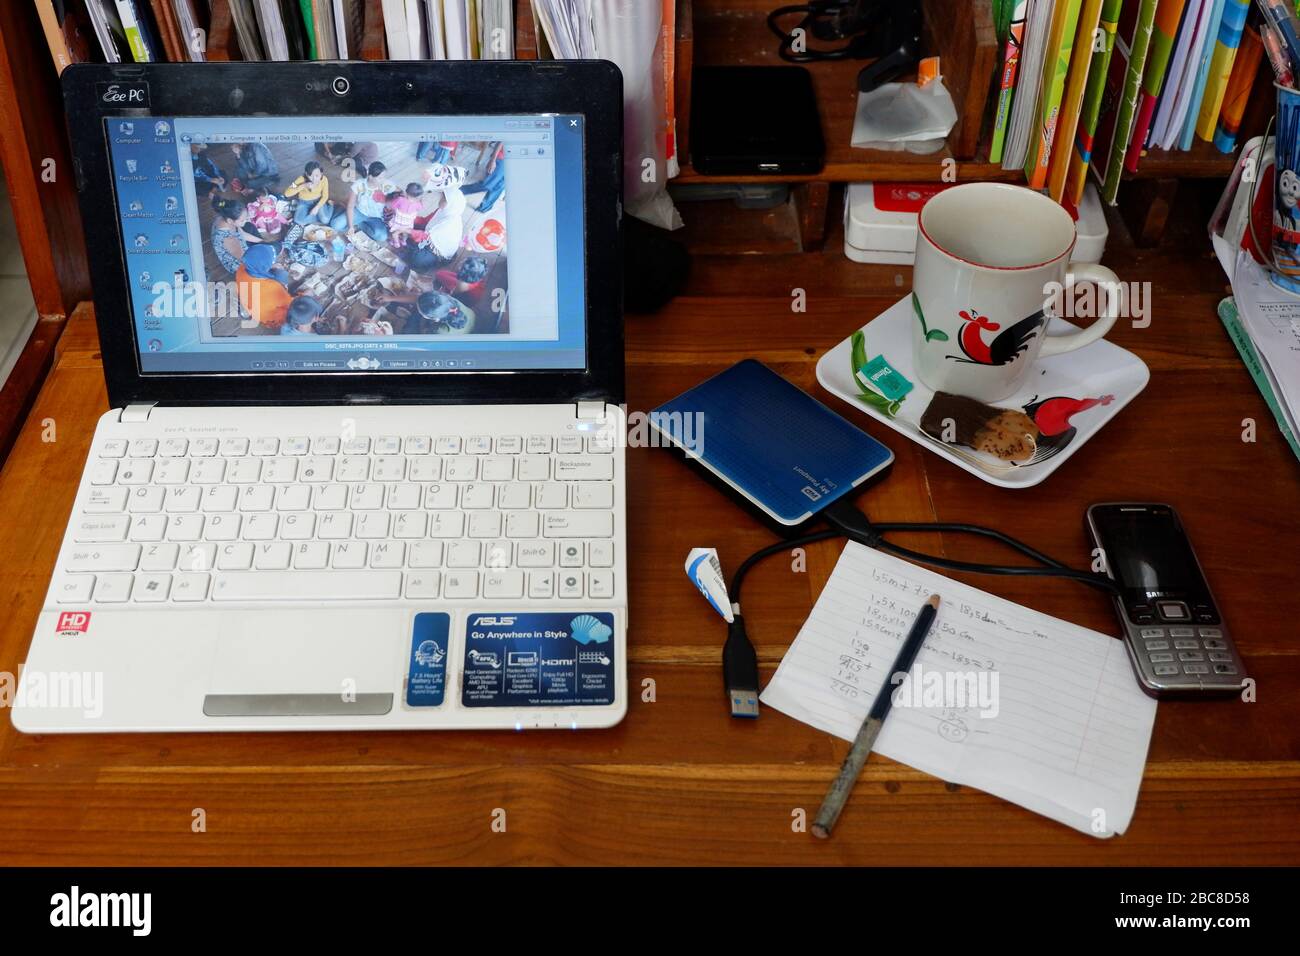 A laptop, an external harddisk, a mug of coffee, a cellphone, a note and a pen. Ready to work remotely at home. Stock Photo